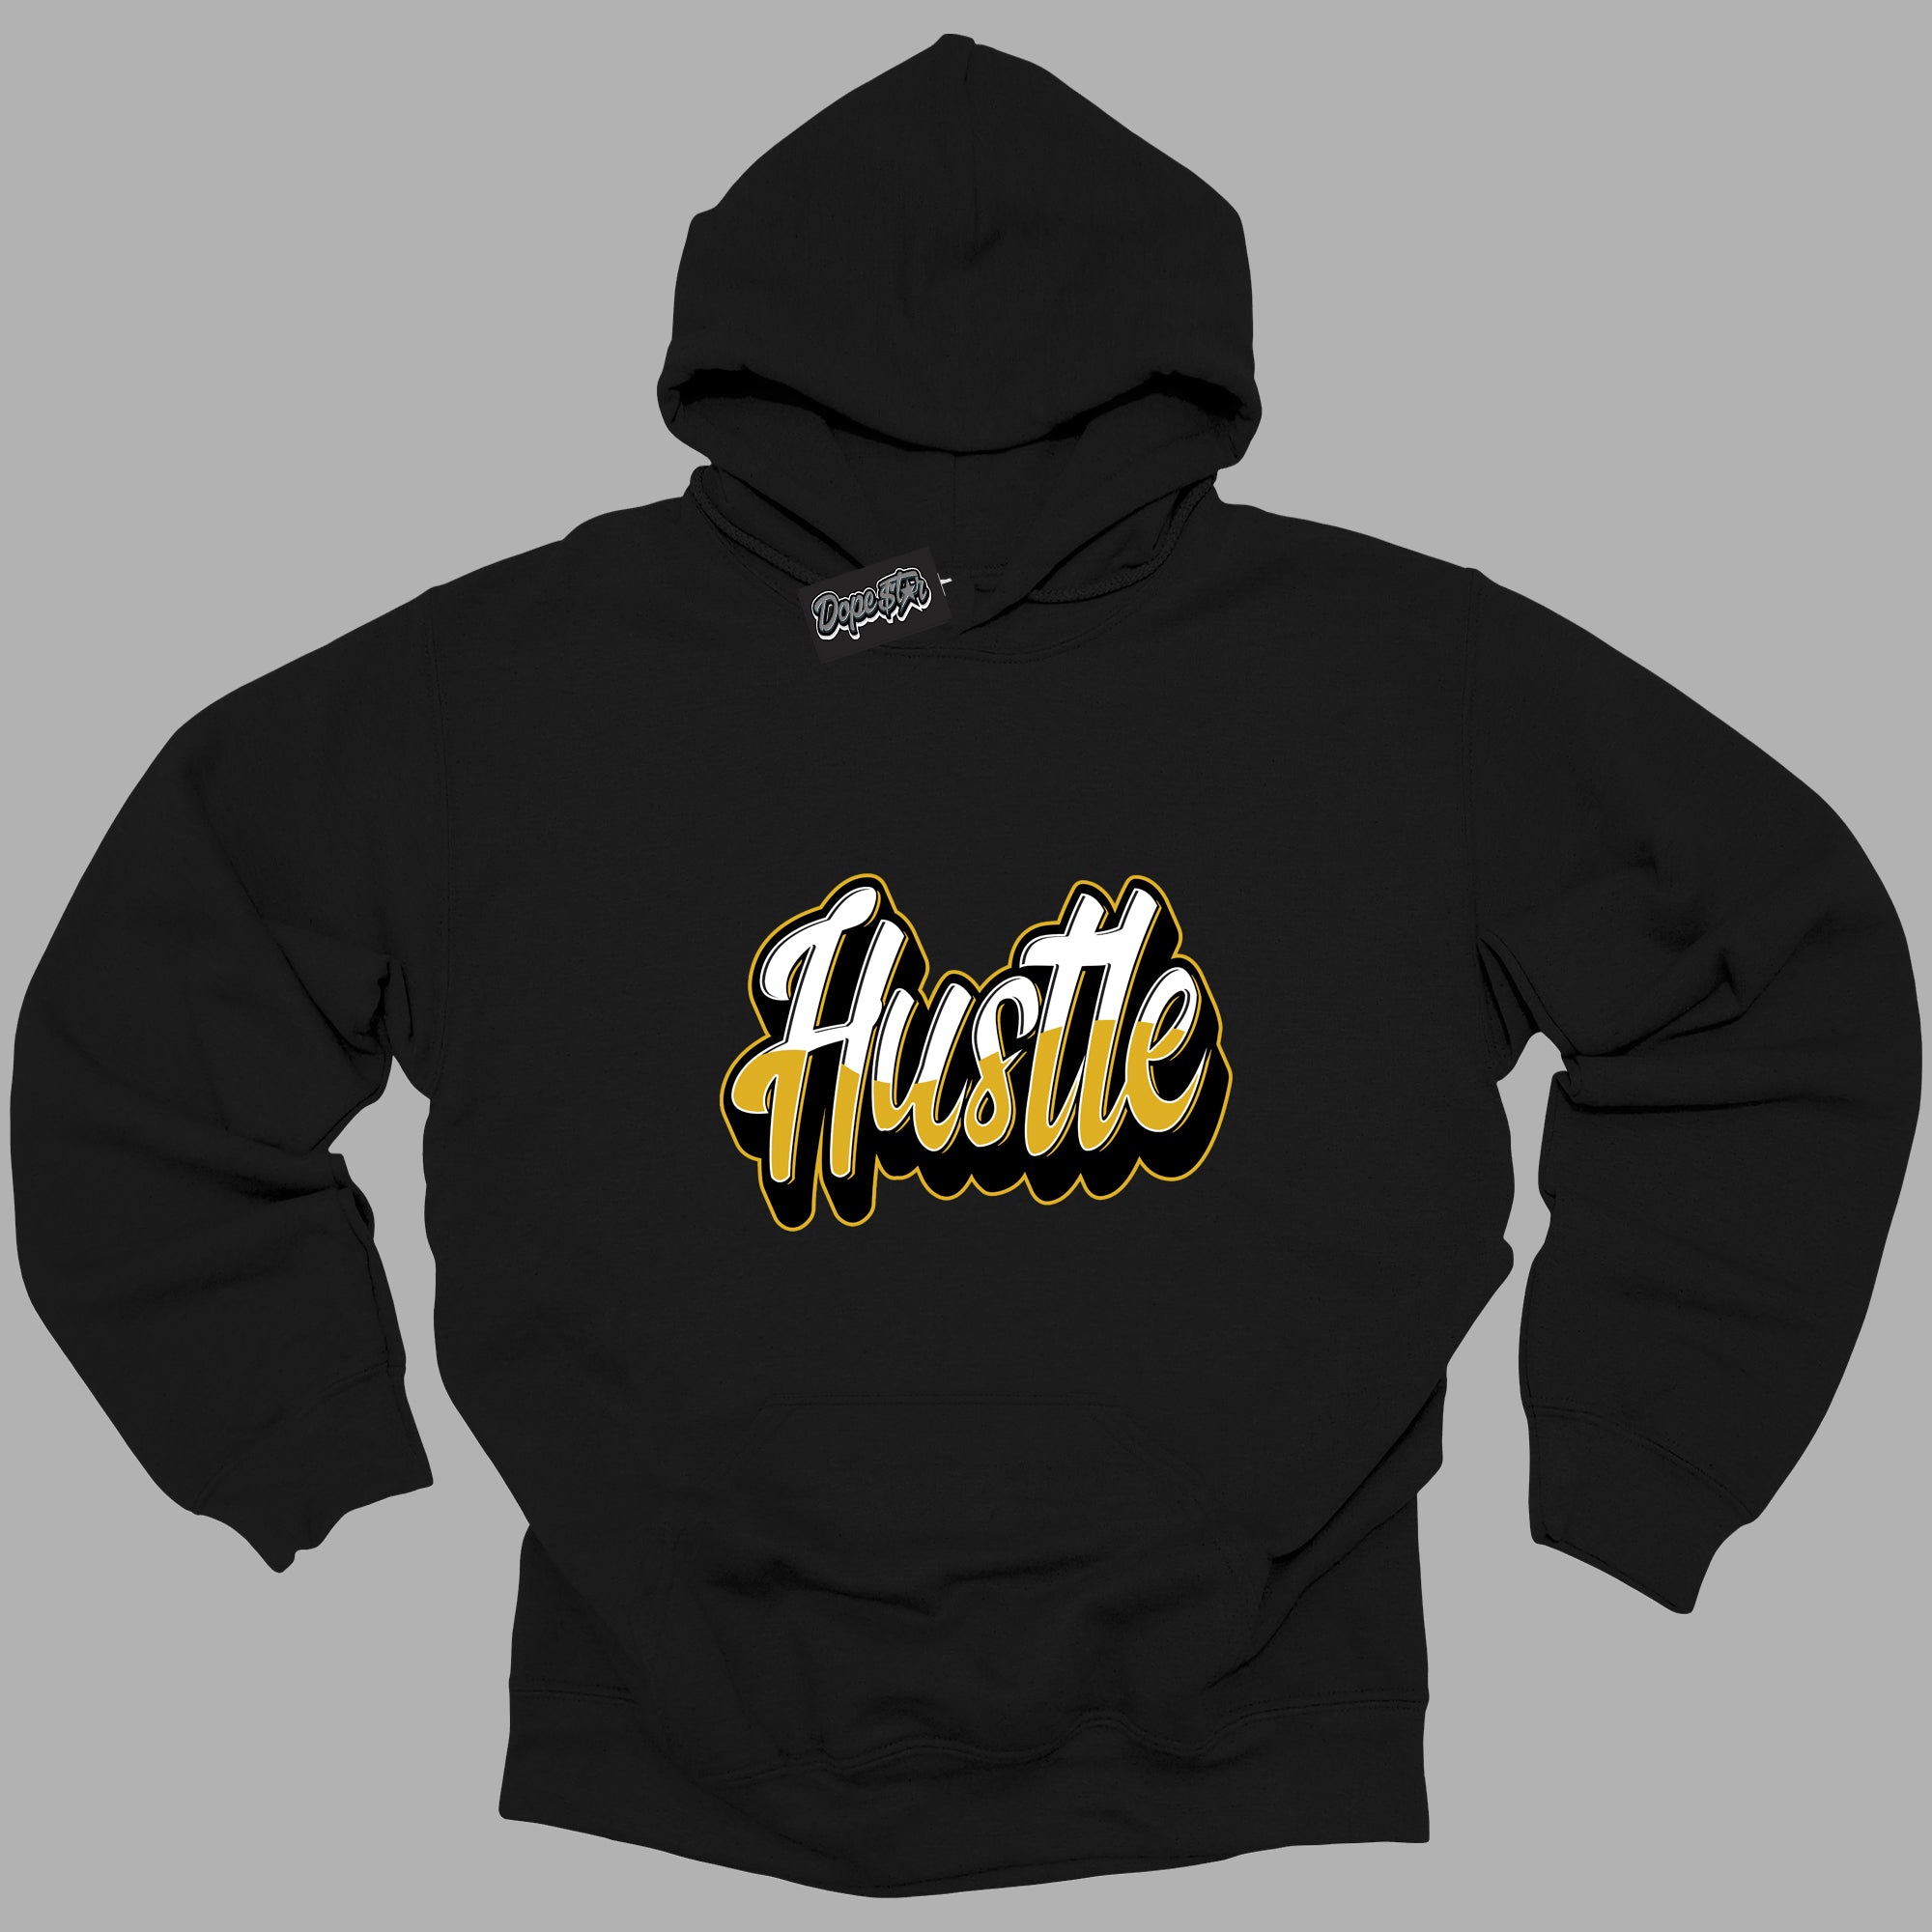 Cool Black Hoodie with “ Hustle ”  design that Perfectly Matches Yellow Ochre 6s Sneakers.